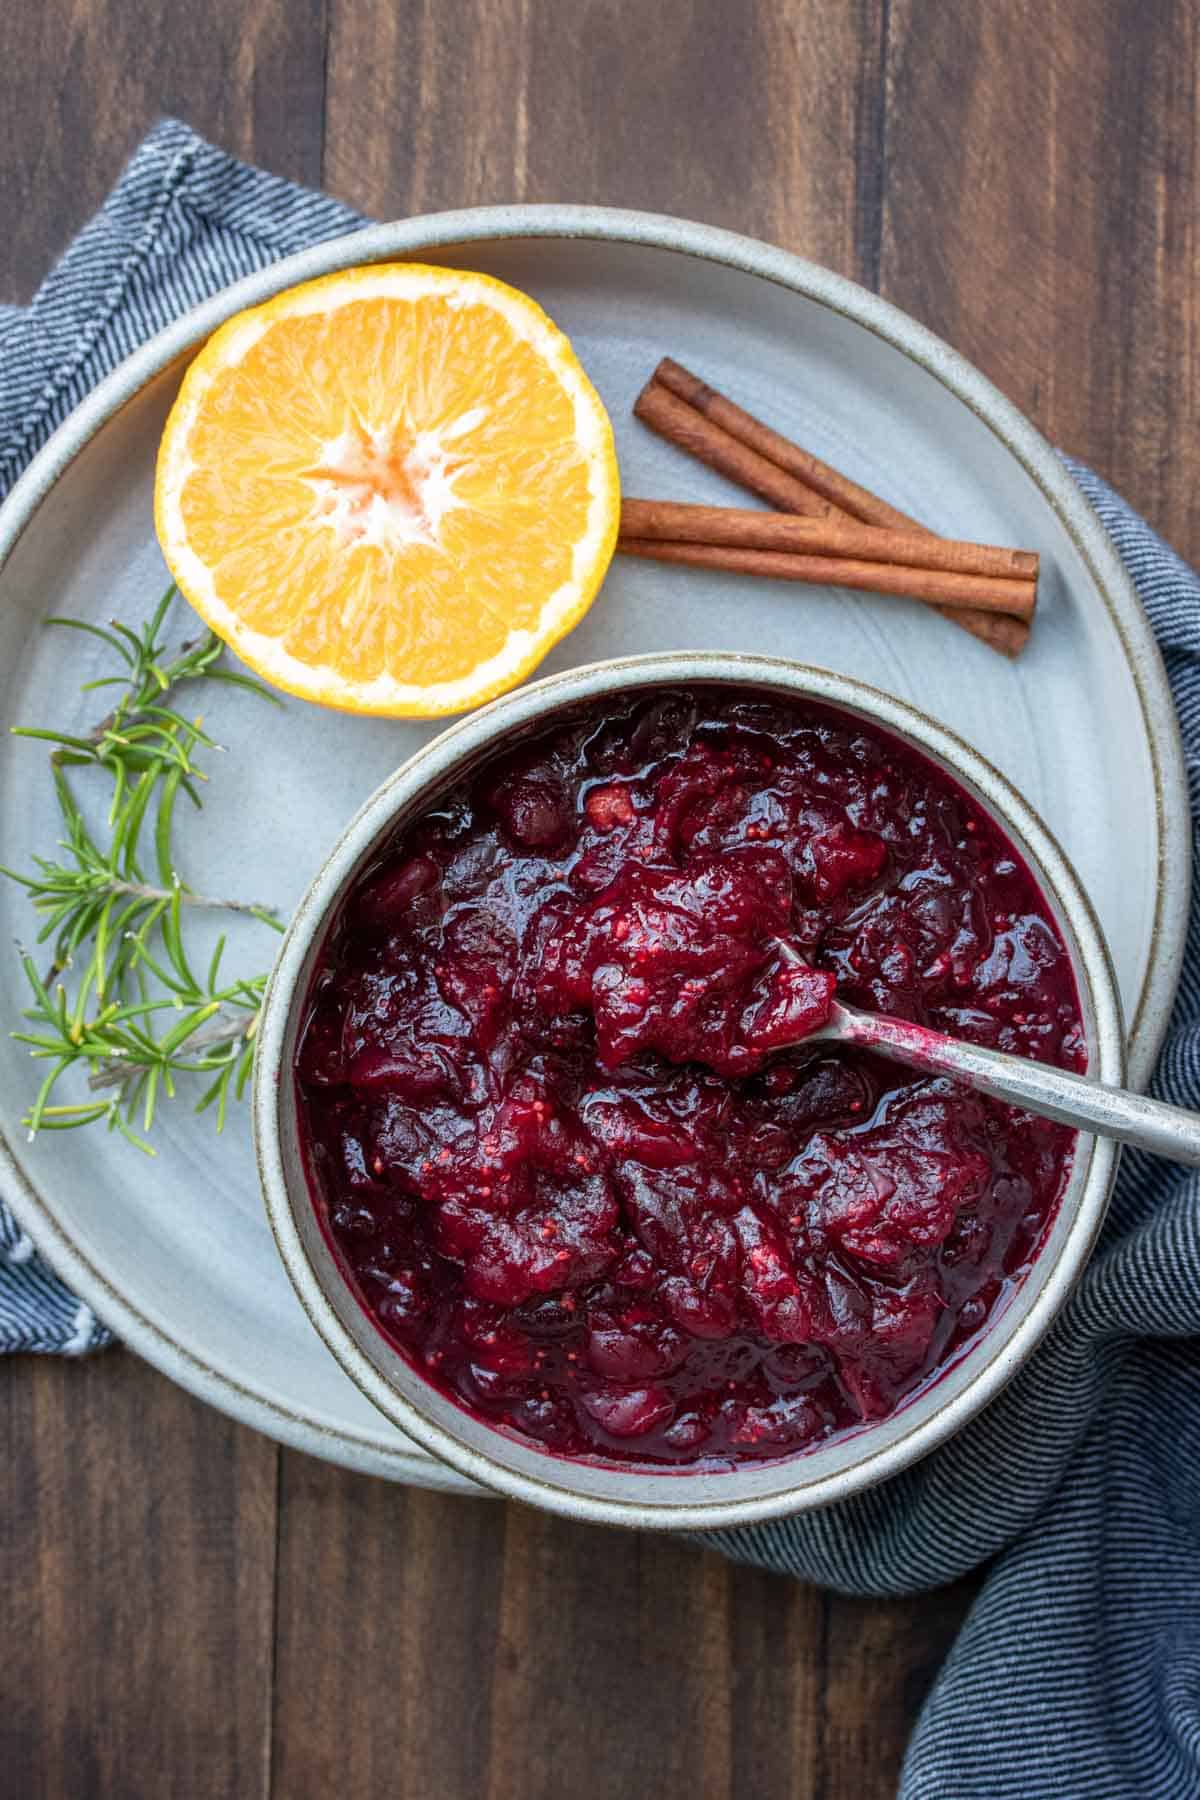 A spoon getting a scoop of cranberry sauce from a grey bowl